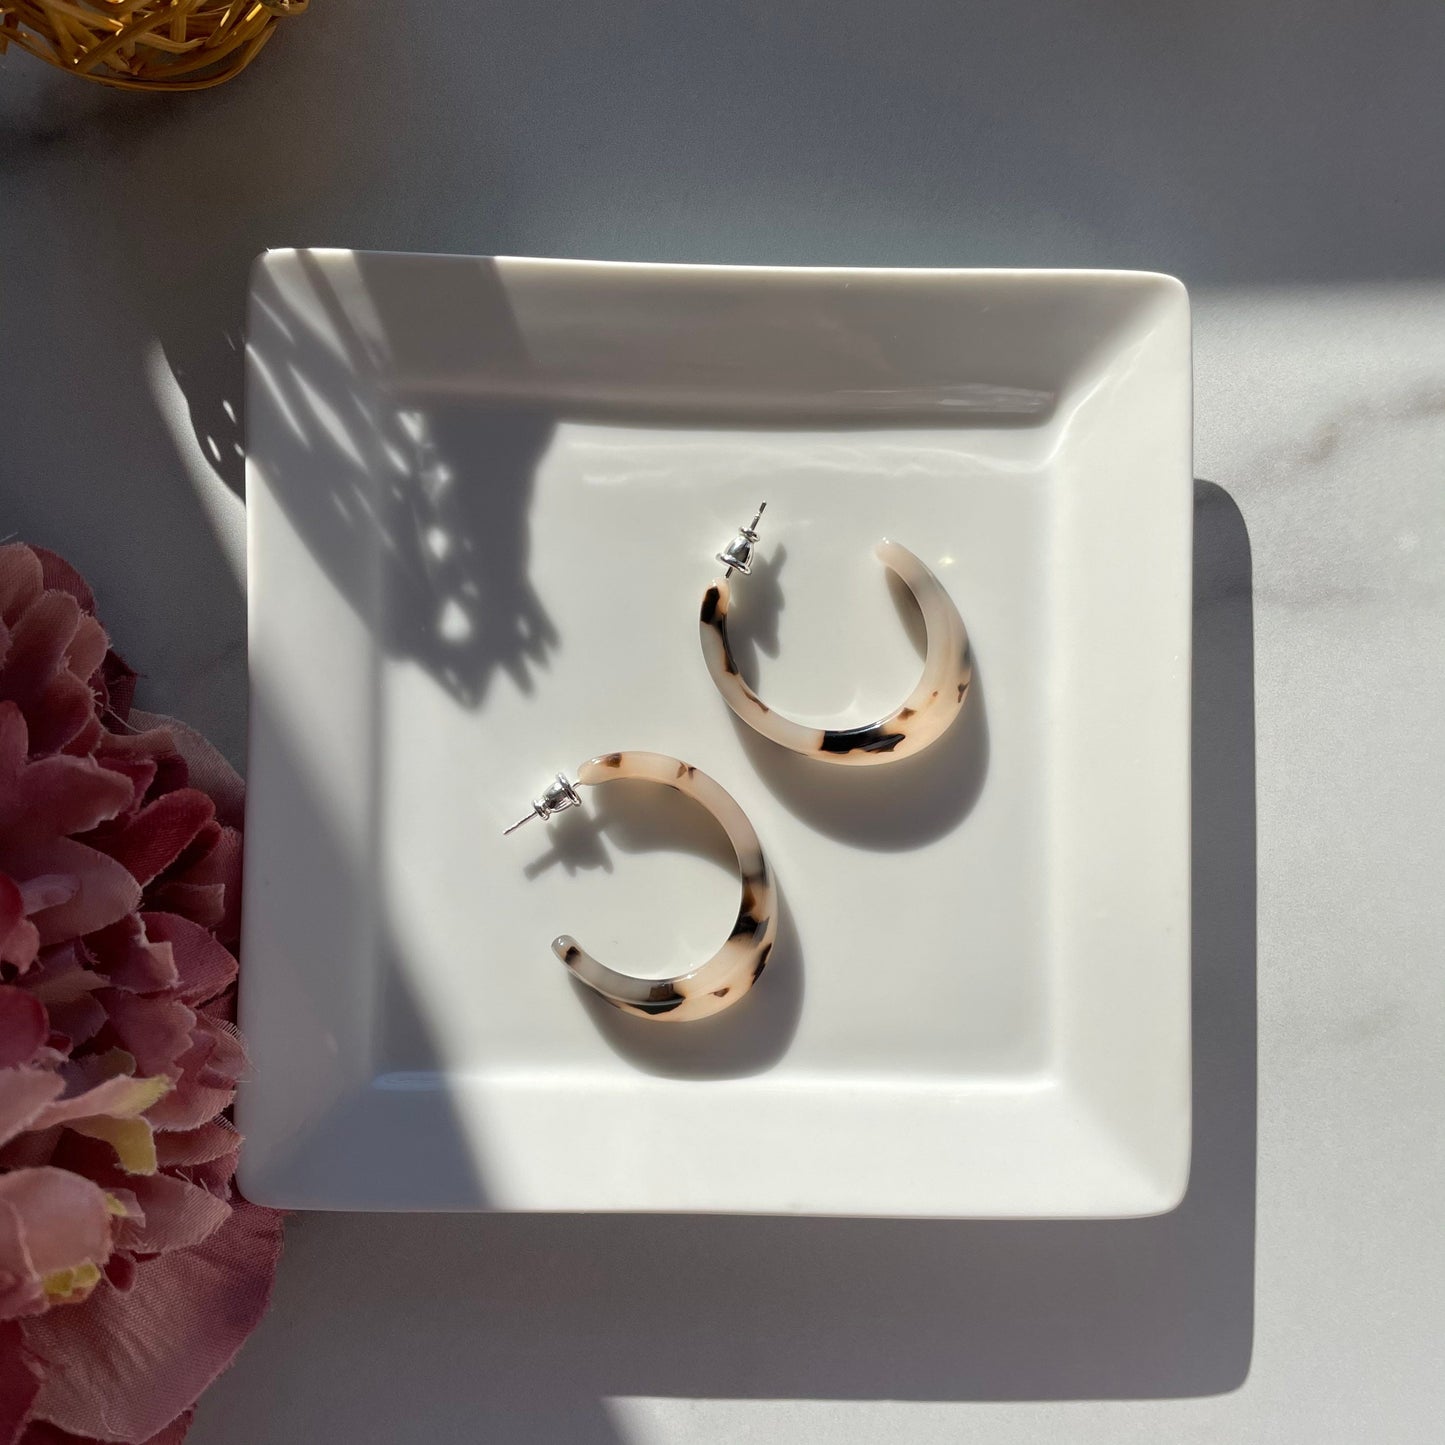 Illusion Hoops in Blonde Tortoise | Tortoise Shell Statement Oval Hoop Earrings Cellulose Acetate Leopard Print 925 Sterling Silver Posts